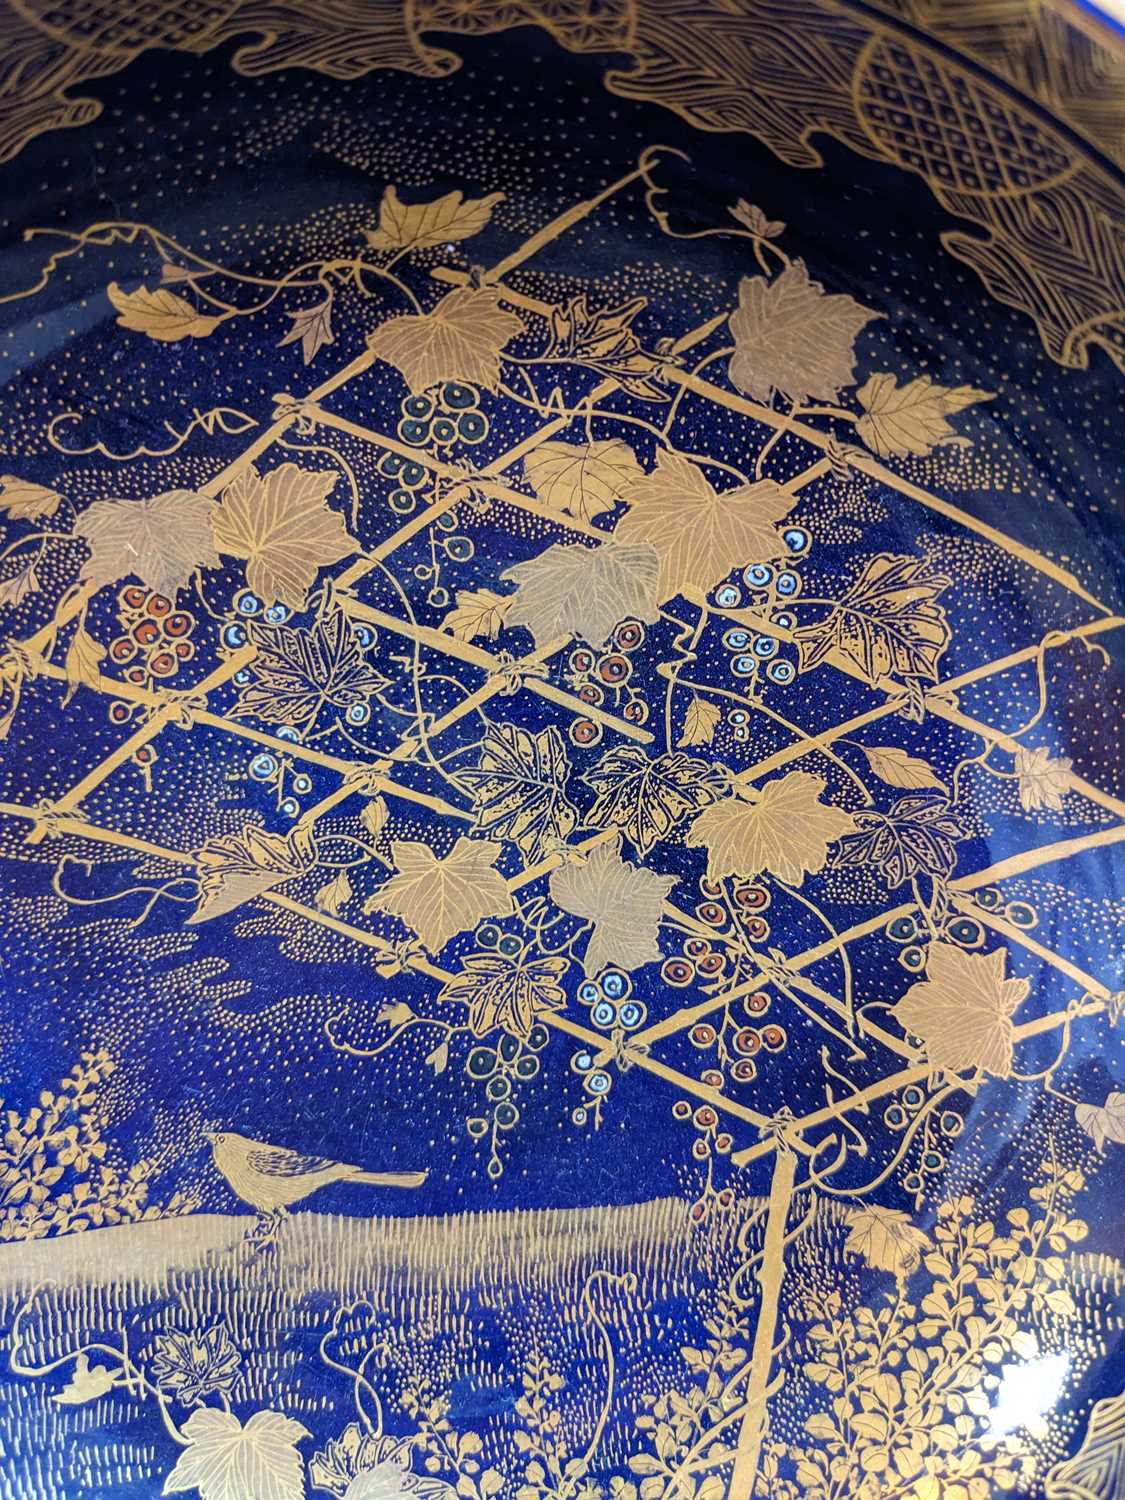 JAPANESE SATSUMA BOWL, Meiji Period, decorated in gilt with enamel highlights on a blue ground - Image 2 of 5